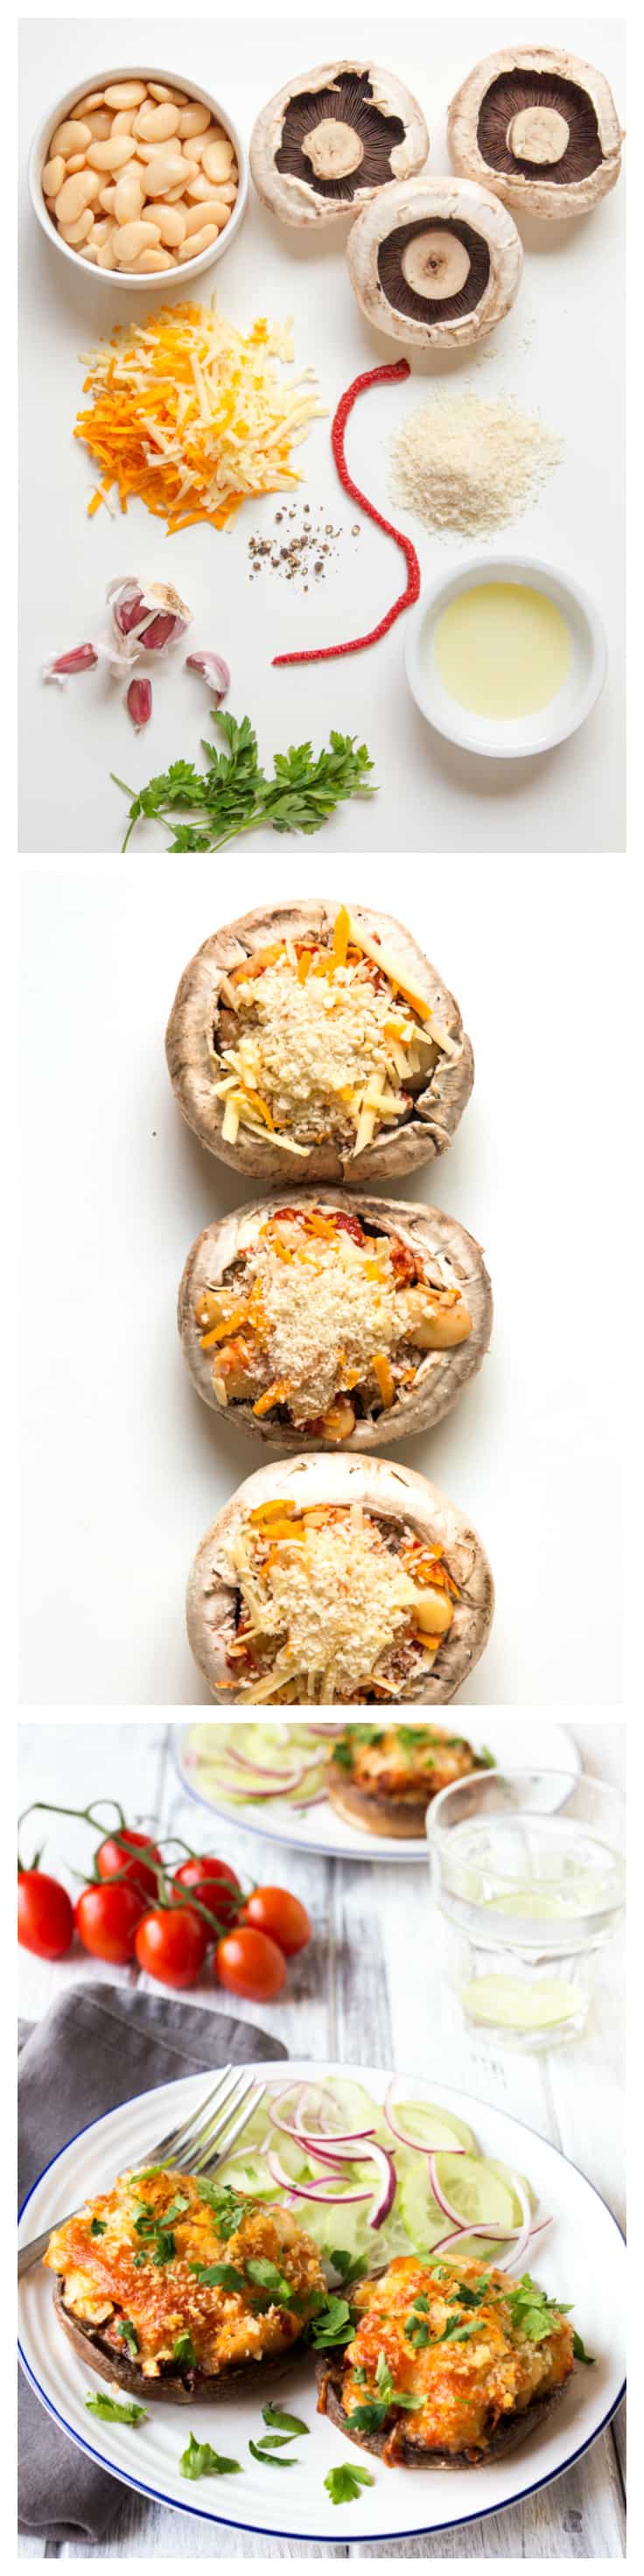 Cheese and Butterbean Stuffed MushroomsCheese and Butterbean Stuffed Mushrooms - This delicious vegetarian dish is perfect for parties or a Meatless Monday meal. Easy to make vegan!